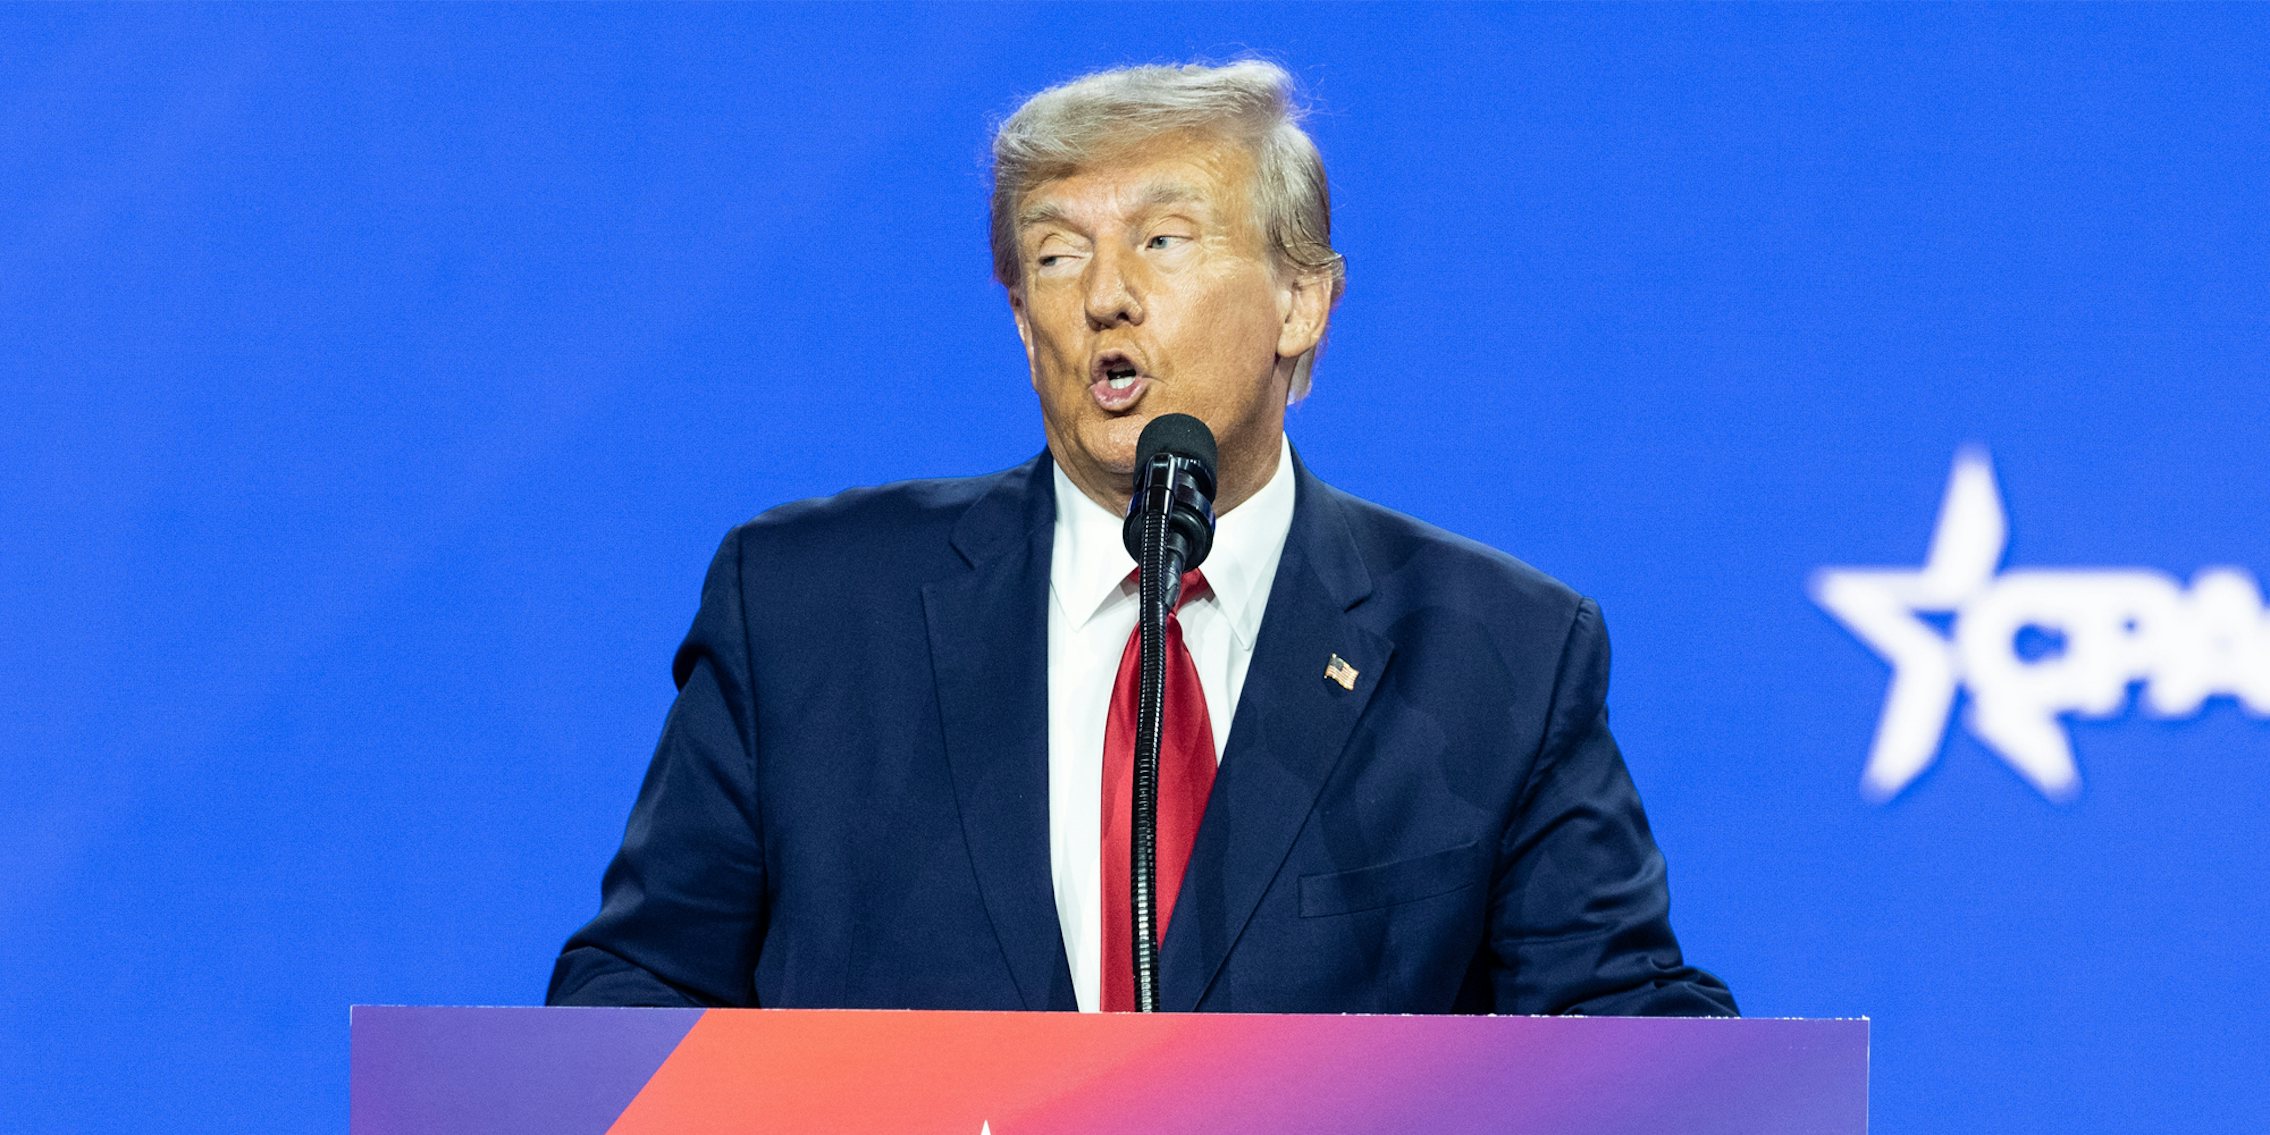 Donald Trump speaking into microphone in front of blue background